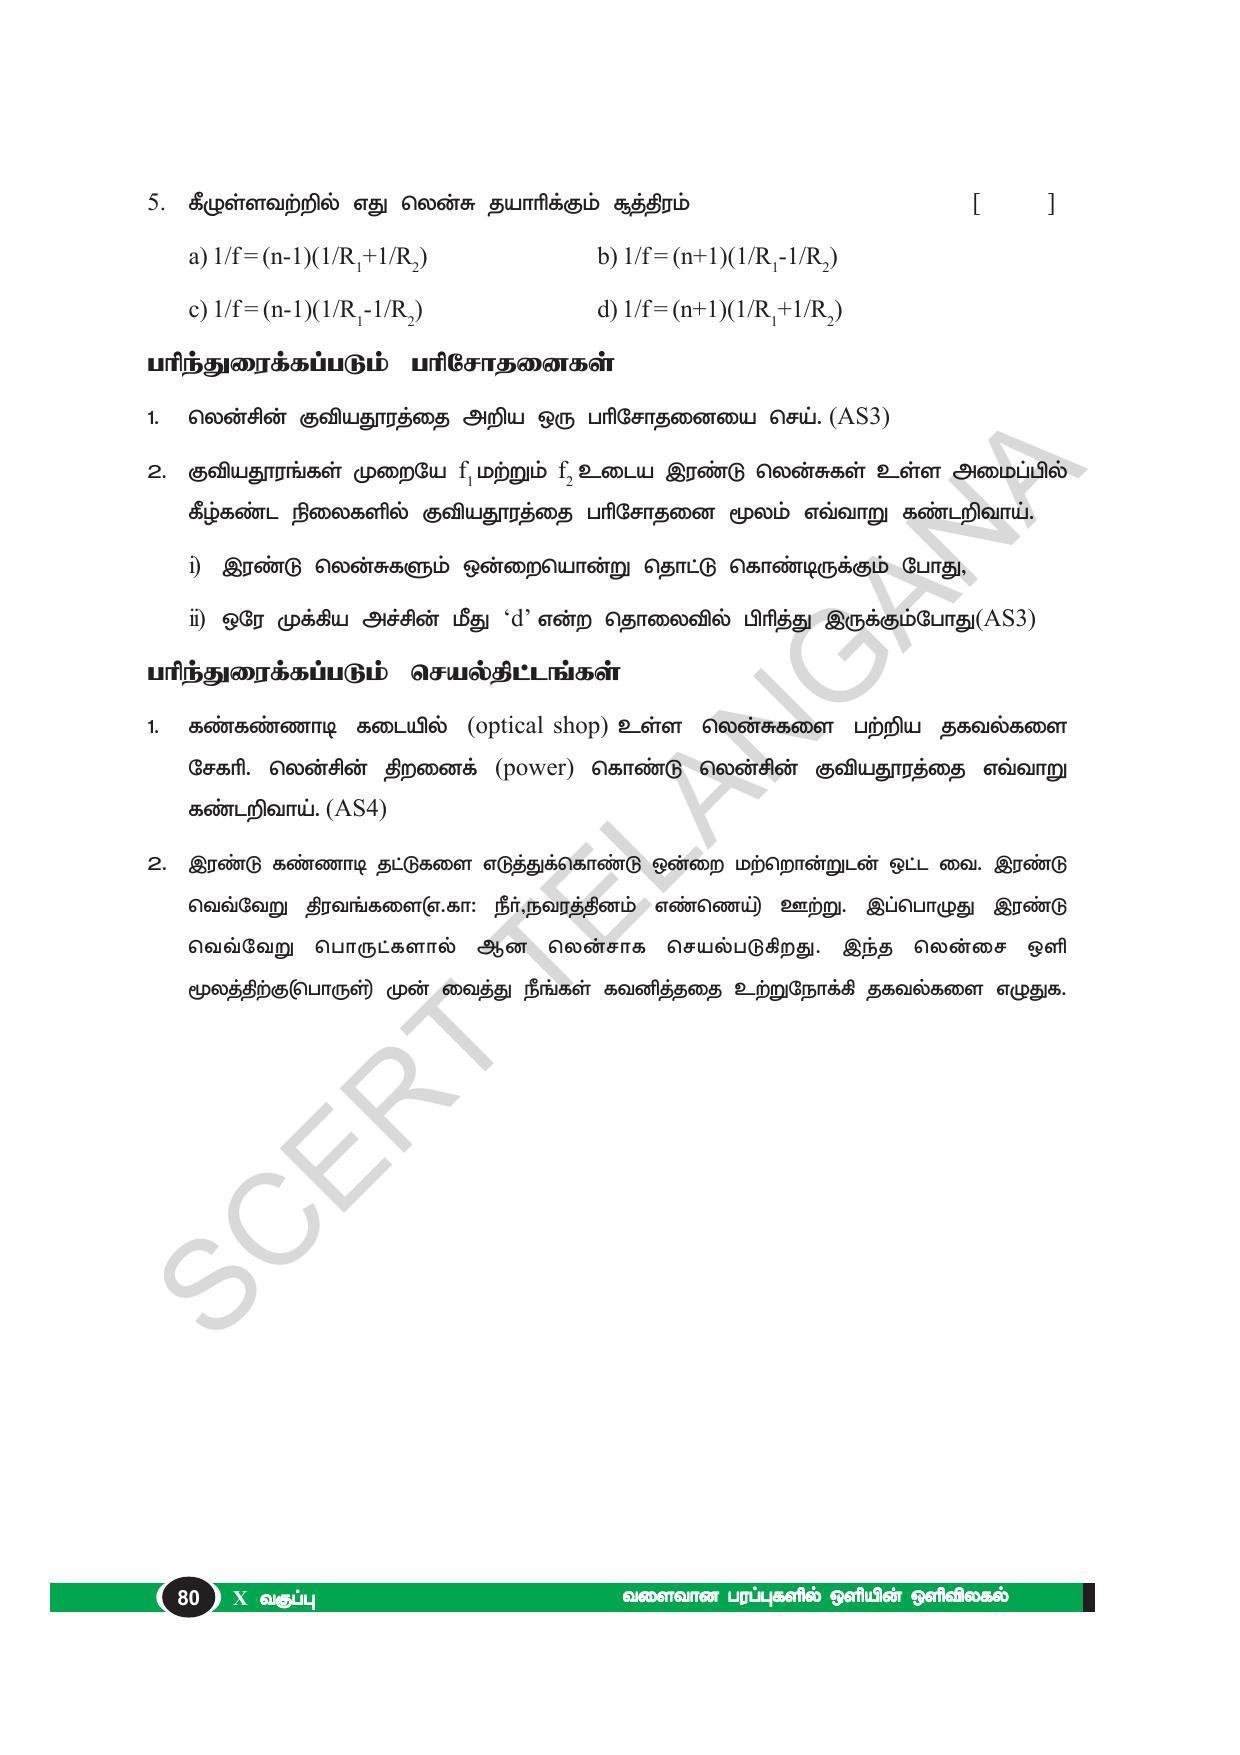 TS SCERT Class 10 Physical Science(Tamil Medium) Text Book - Page 92